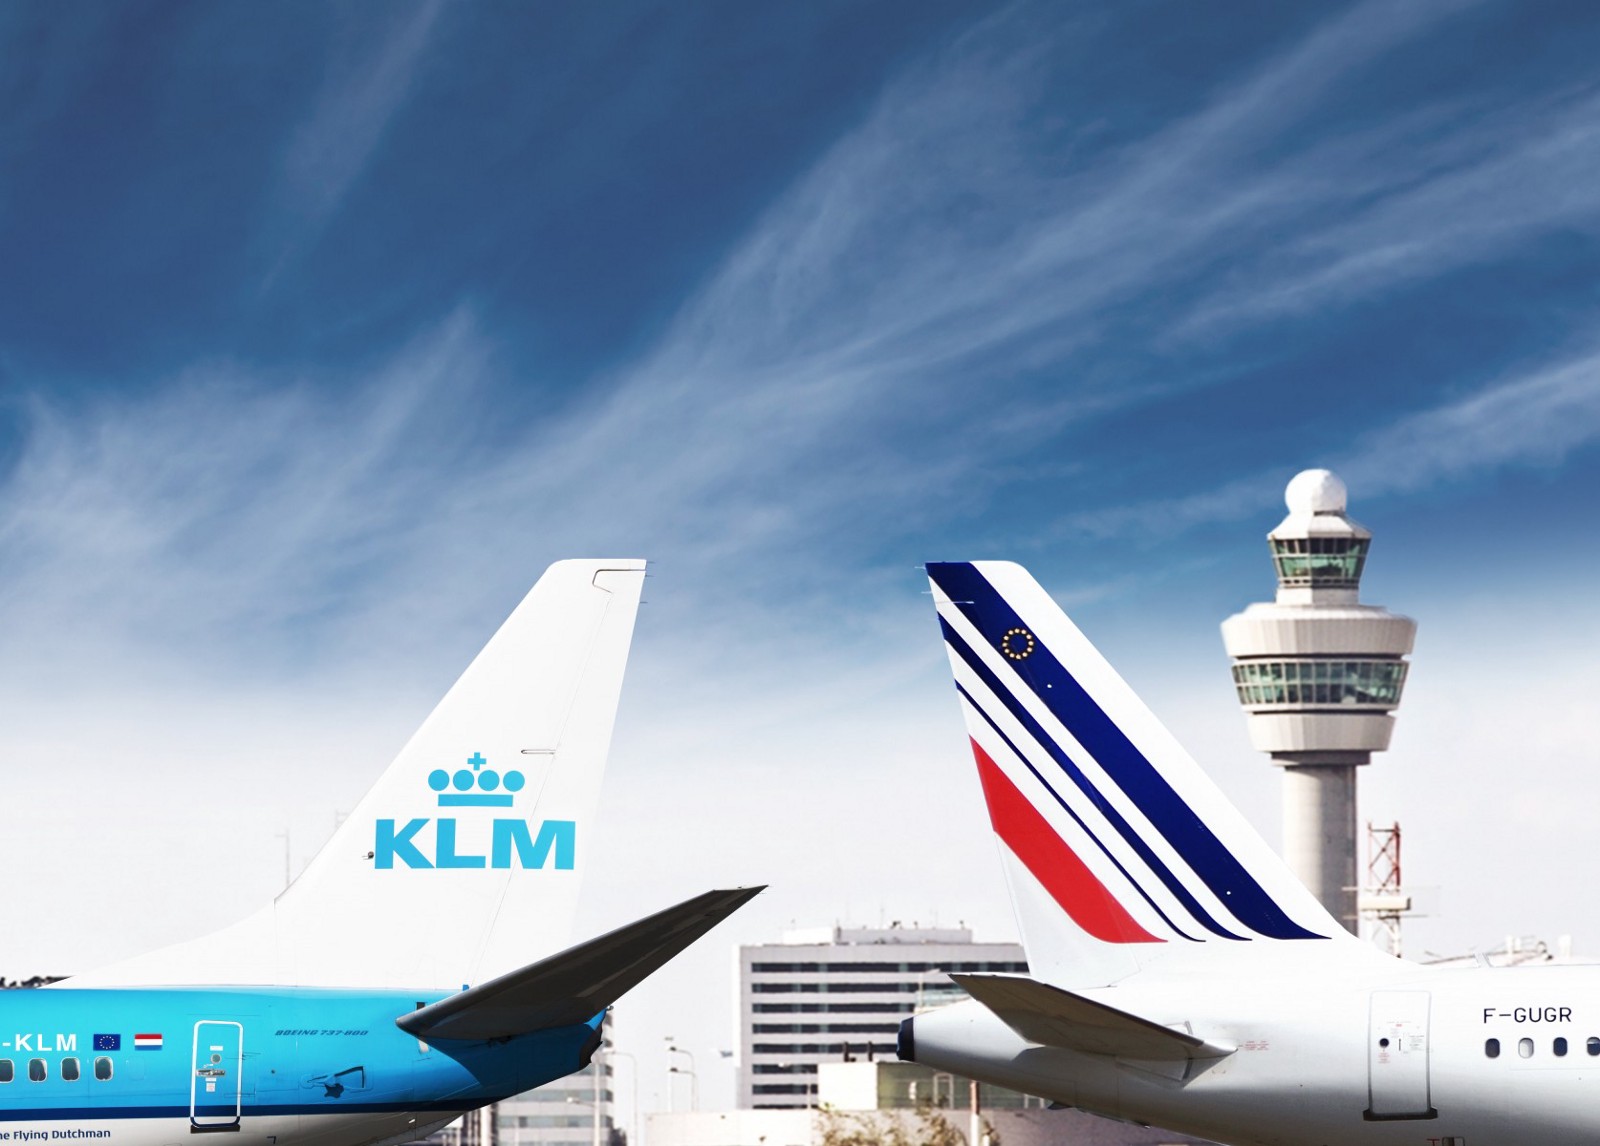 'Keeping our cool under pressure' - Air France Inter-Union Committee Letter to KLM Unions